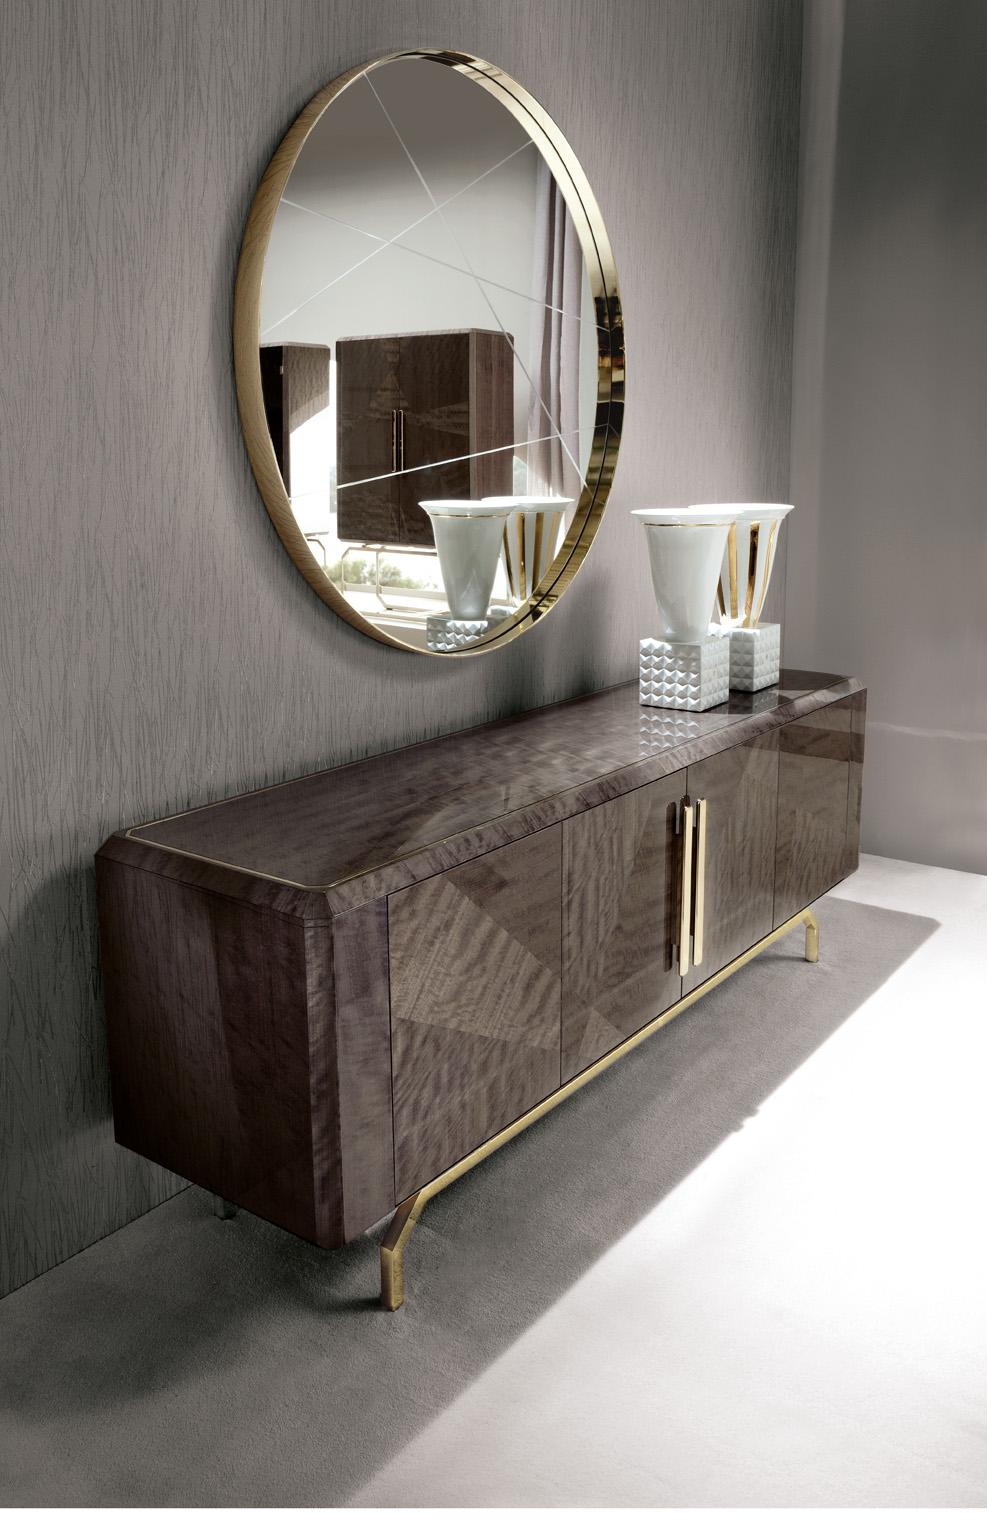 Giorgio Collection Infinity Buffet with 4 inlaid doors in makorè mahogany veneer with high gloss polyester finish.
Top with insert in light gold chrome stainless steel. 
Base and 2 center handles in light gold chrome stainless steel with Giorgio